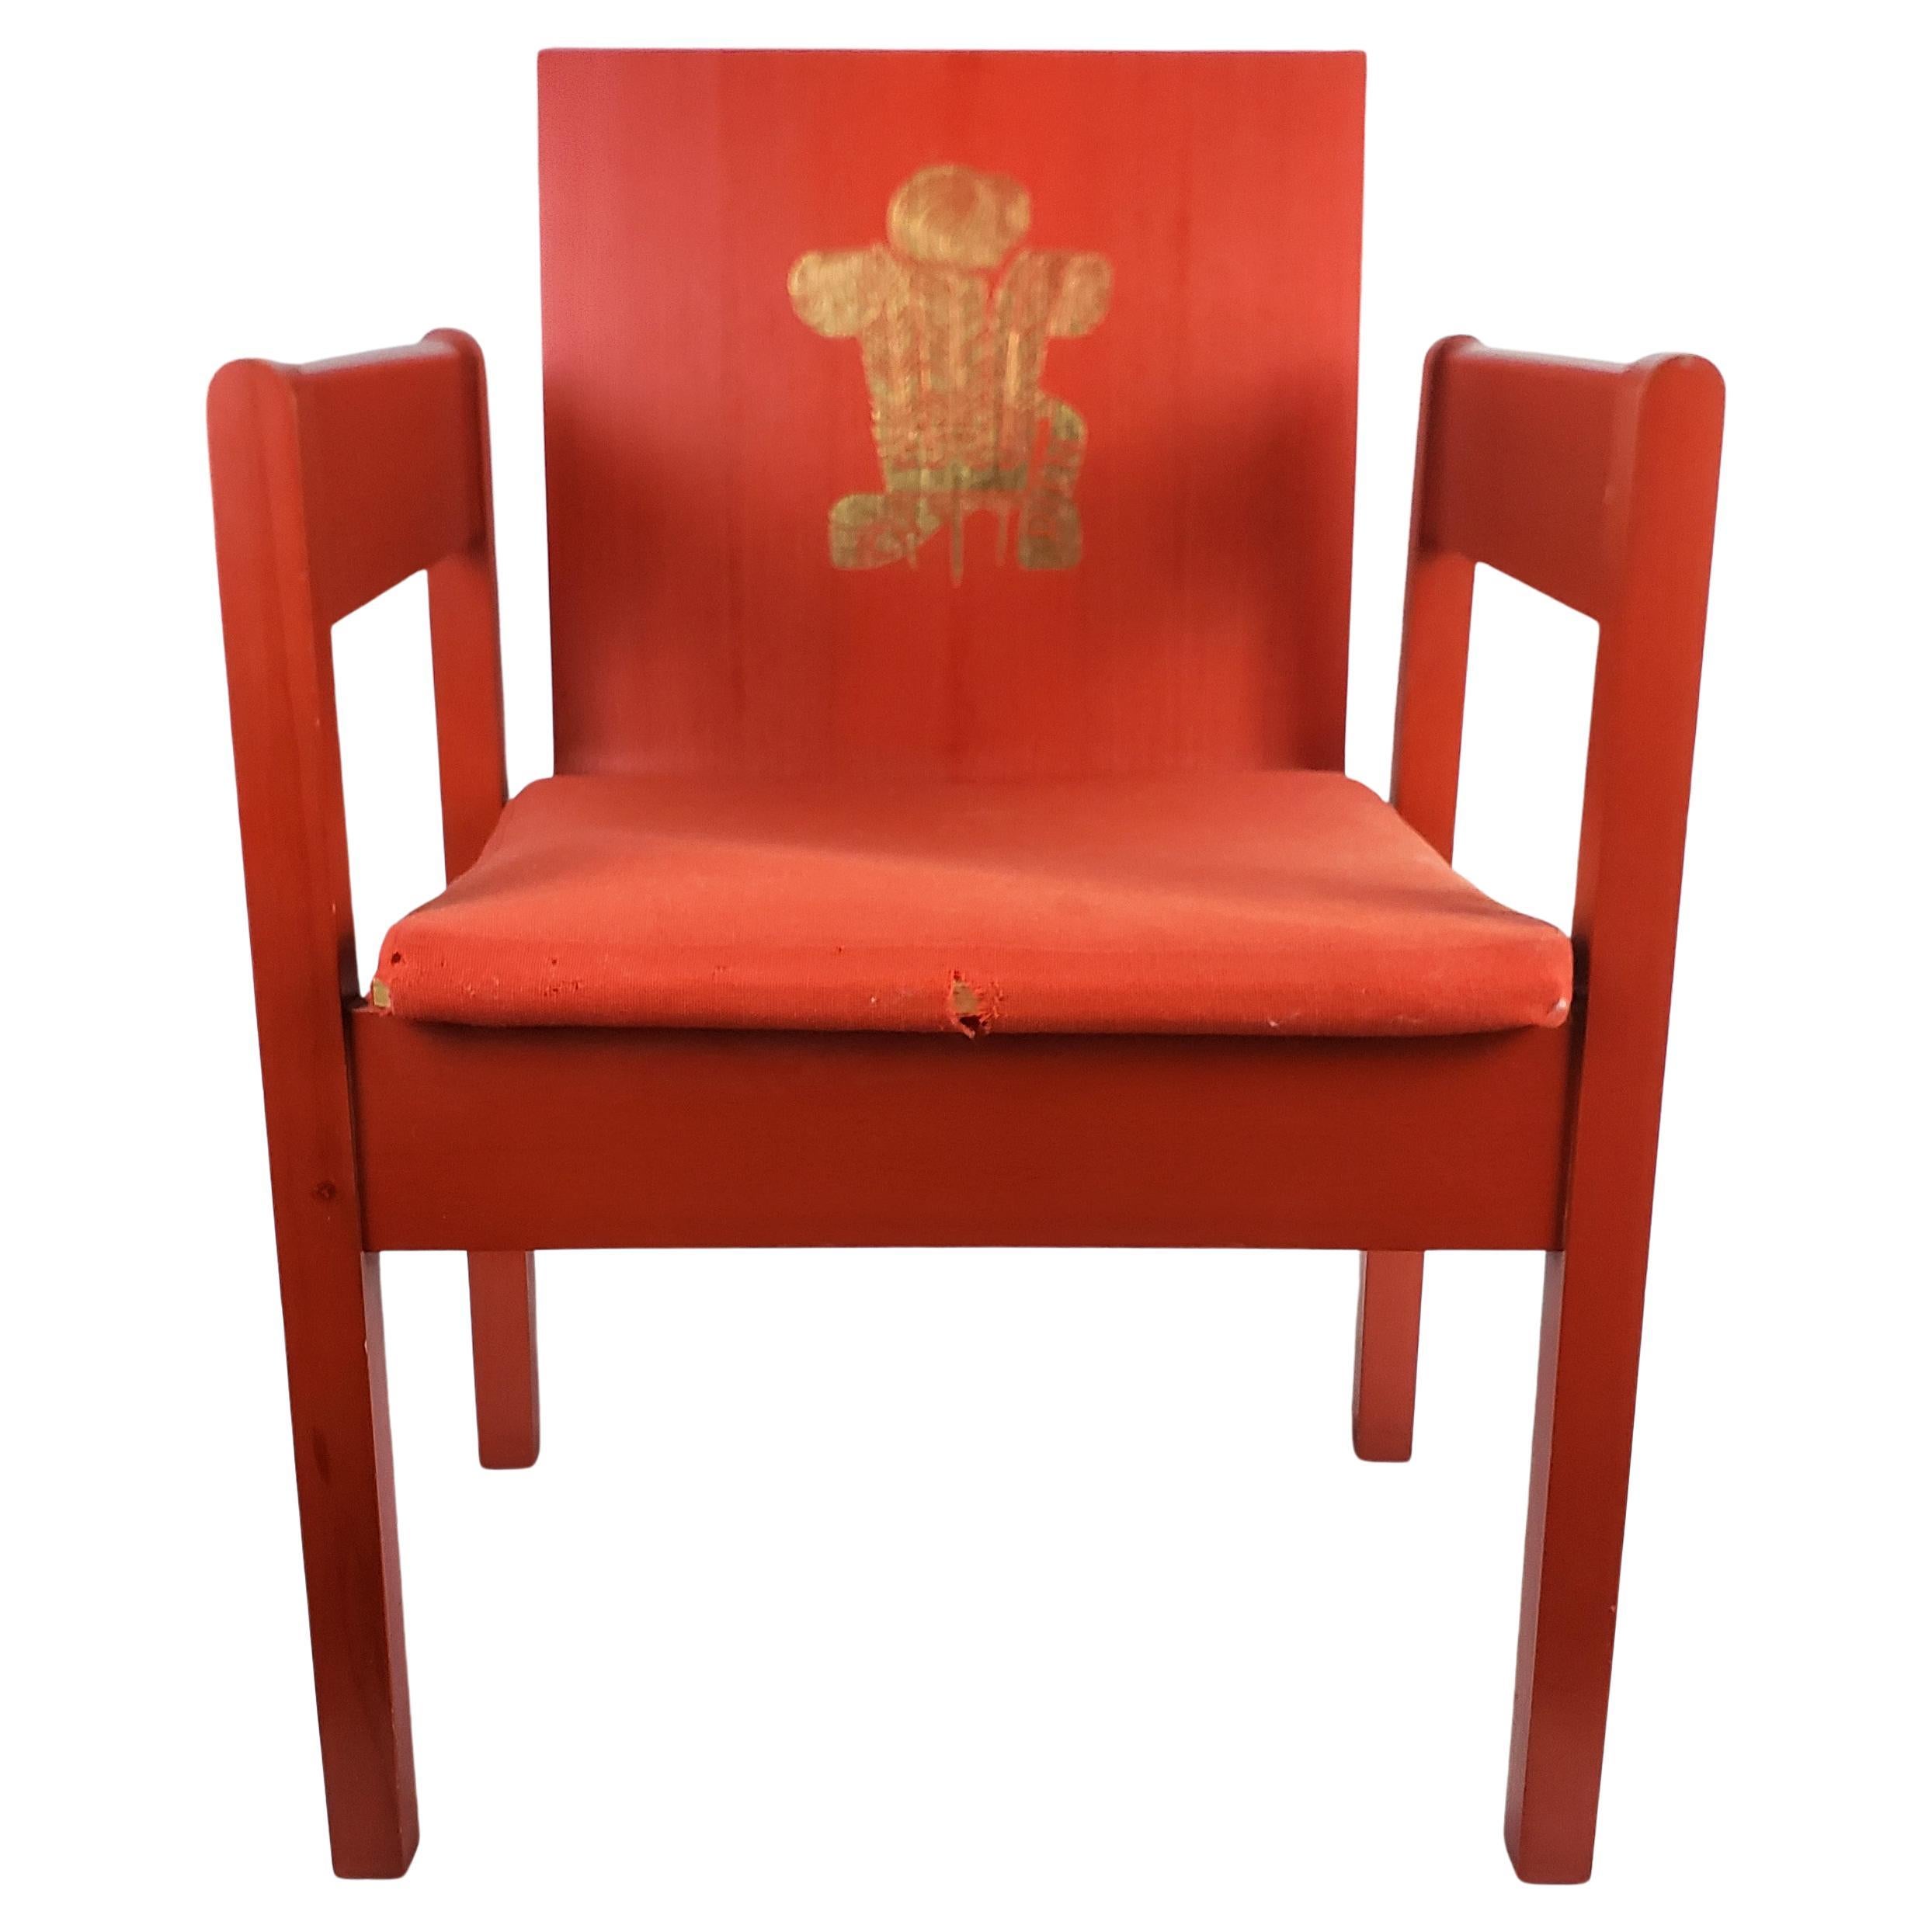 Mid-Century Investiture Chair Designed by Lord Snowden for Prince Charles 1969 In Good Condition For Sale In Hamilton, Ontario